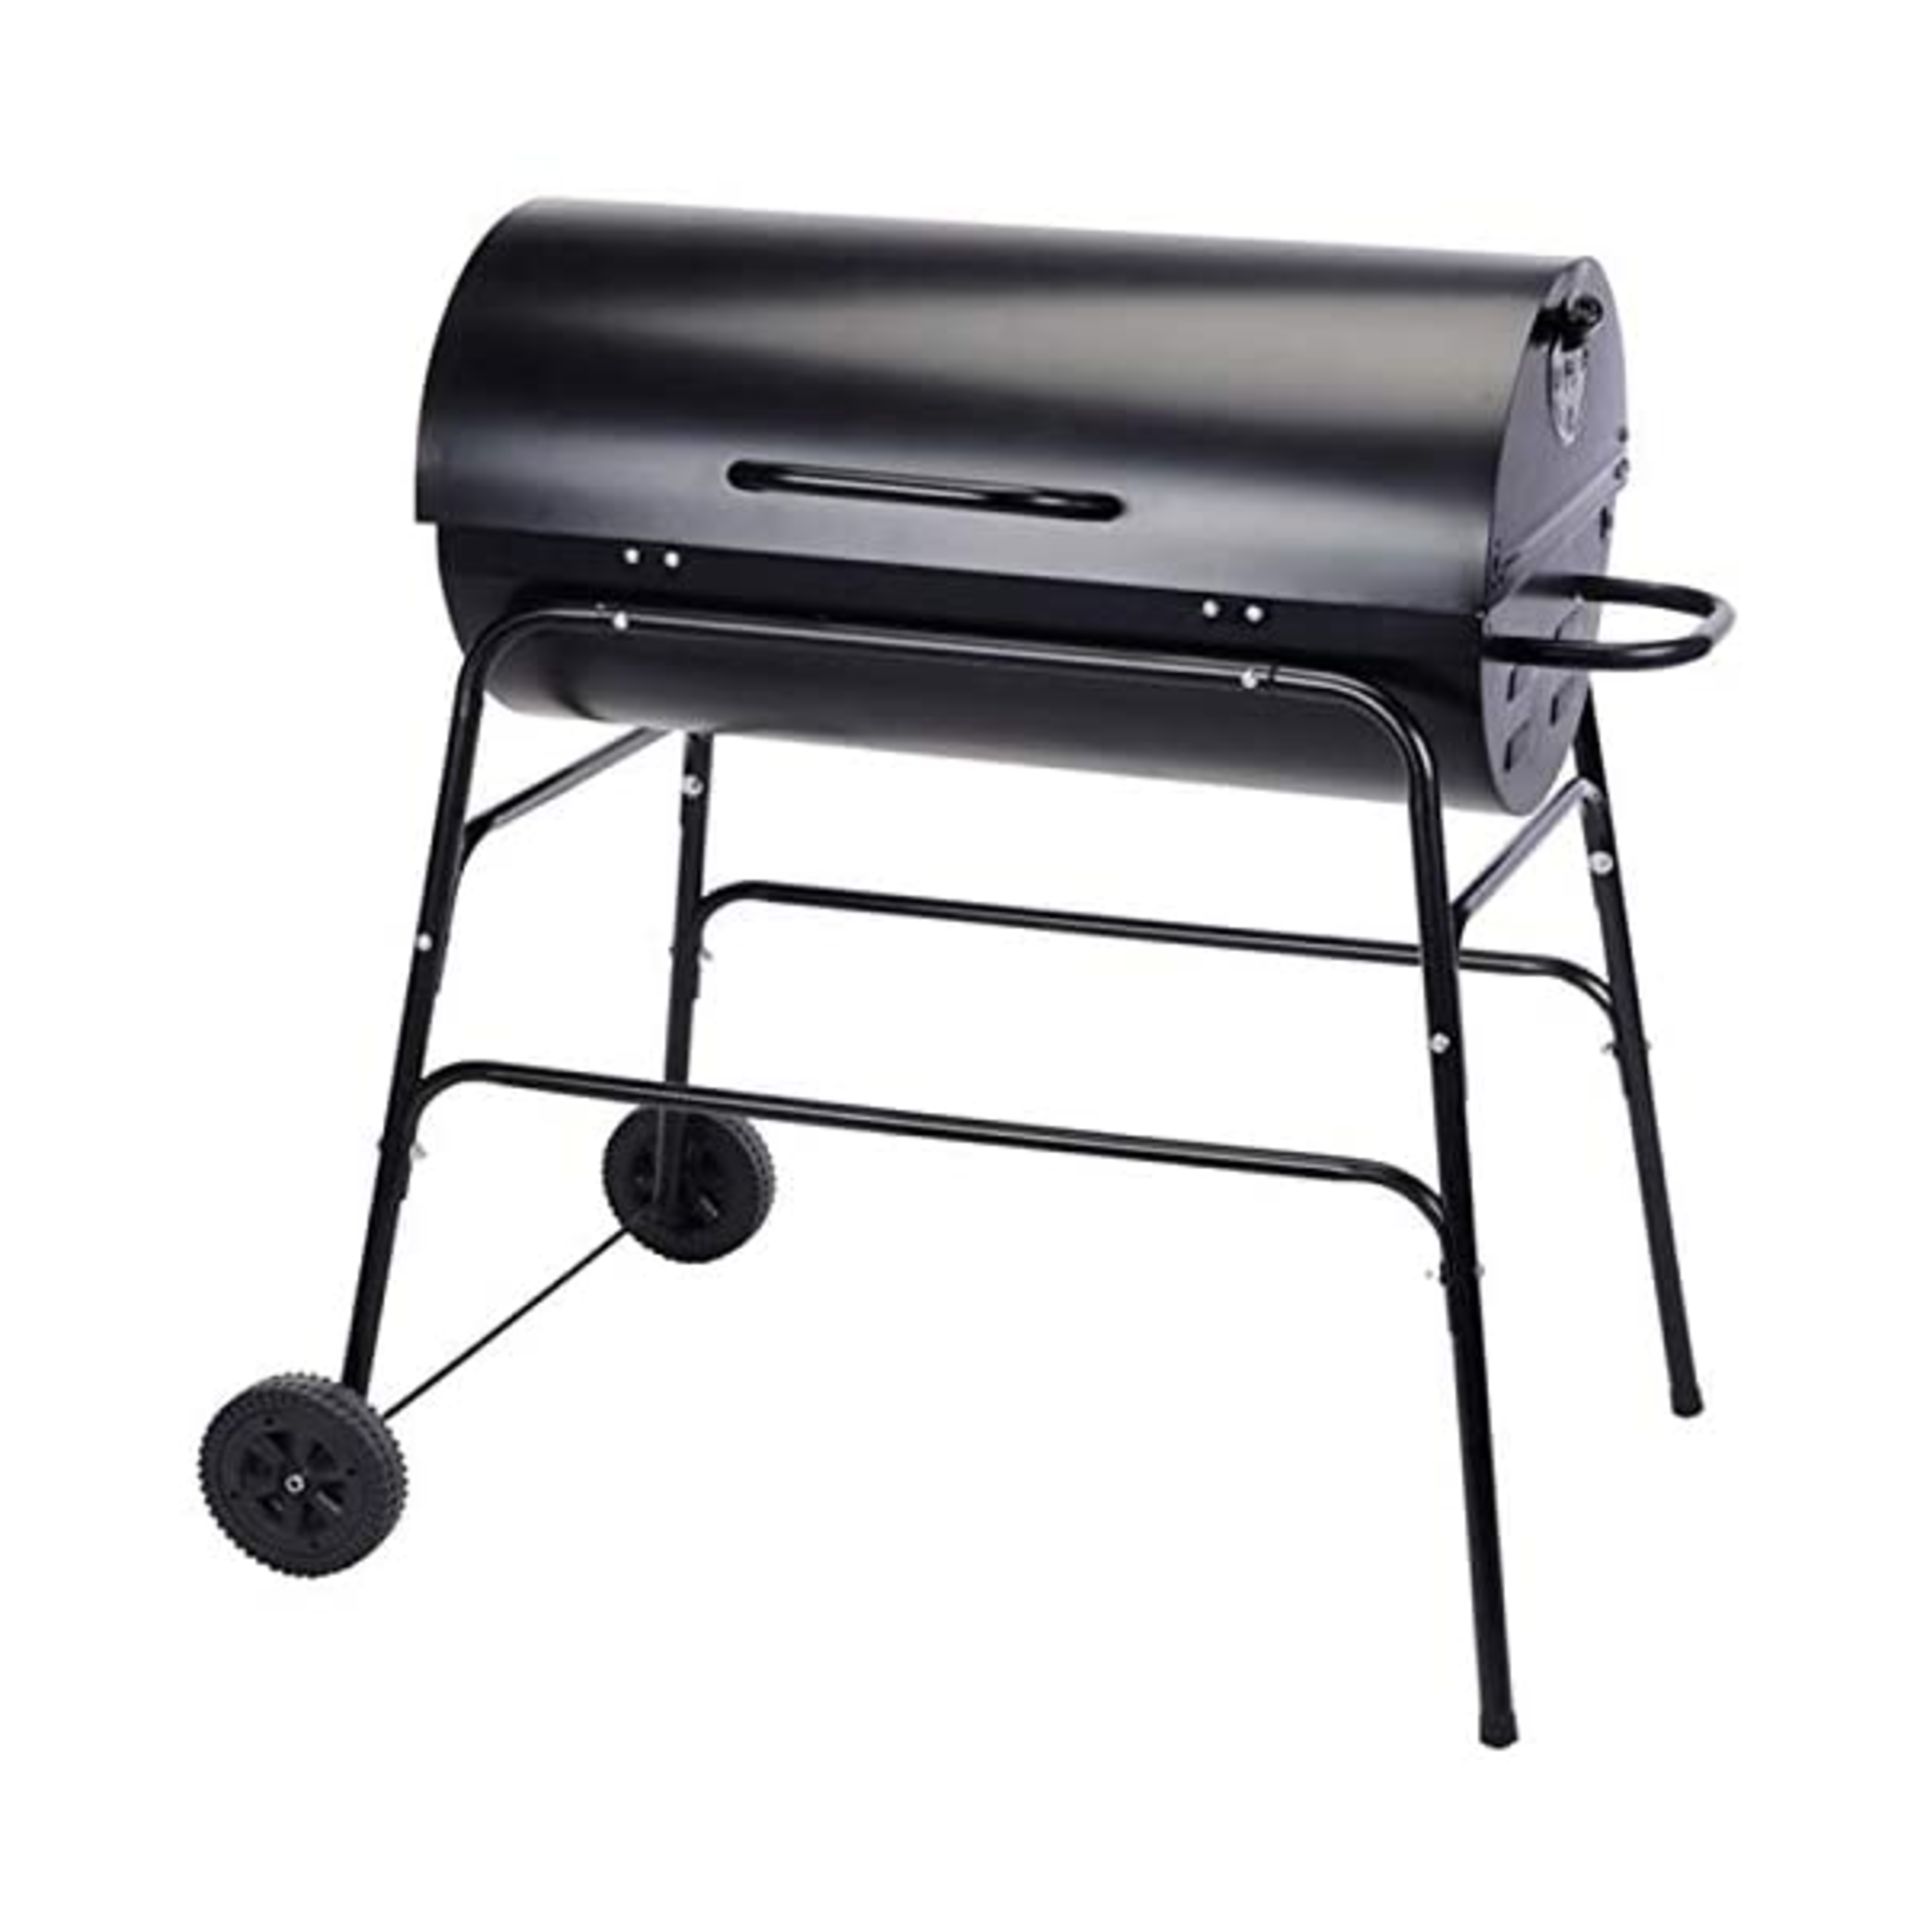 + VAT Brand New Texas Flame Master Oil Drum Charcoal Barbecue - Size H90 x W93 x D64.5cm - Made